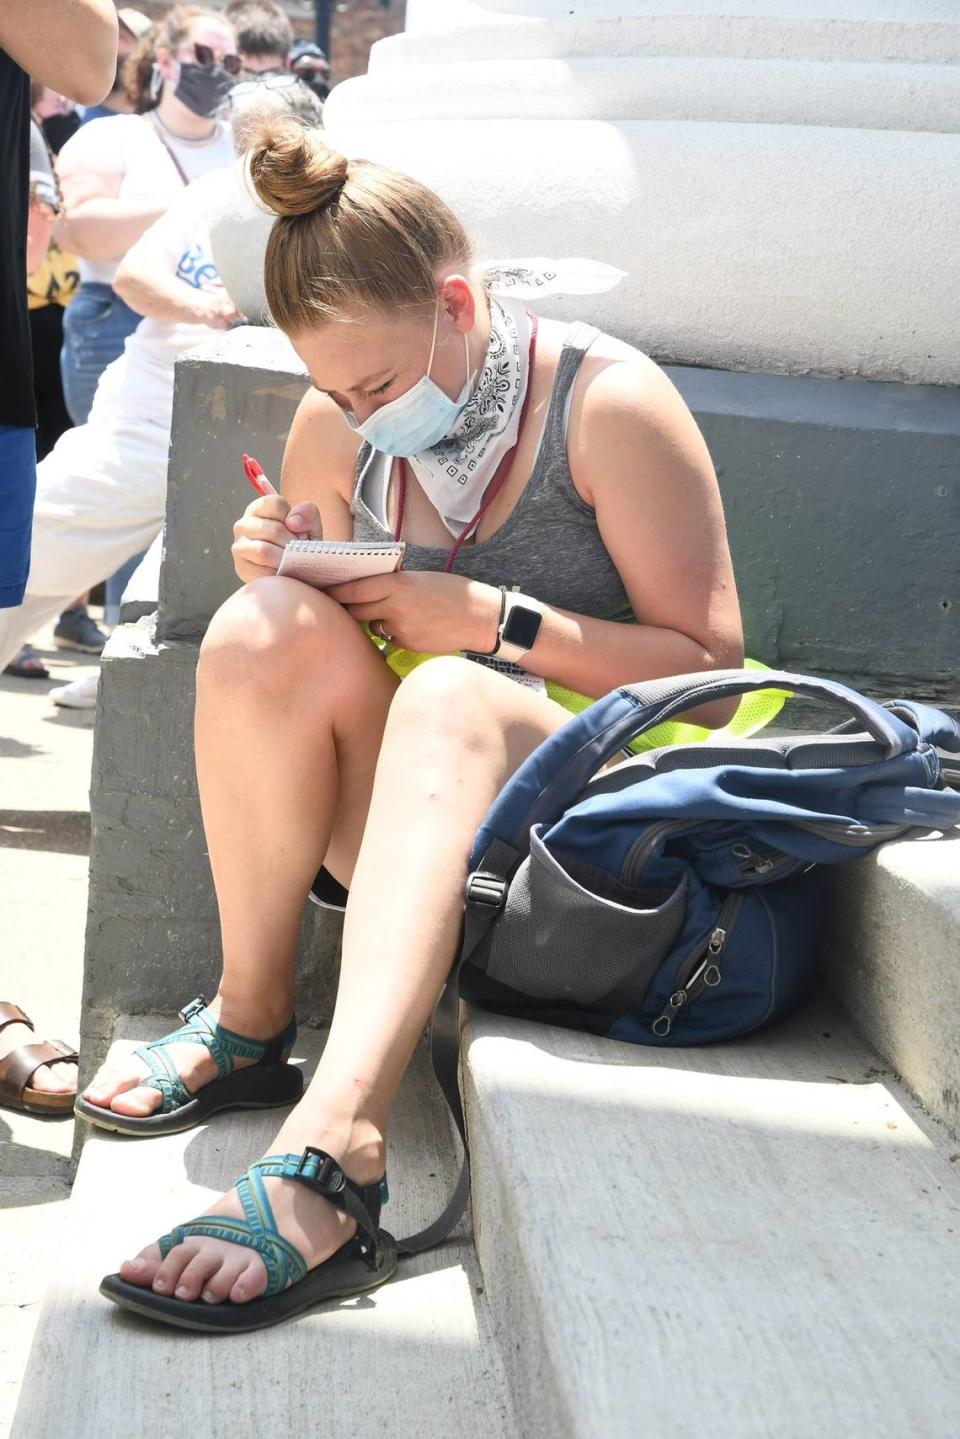 Herald-Leader reporter Taylor Six reports during a Black Lives Matter protest in Richmond, KY, in July 2020. Taylor Six